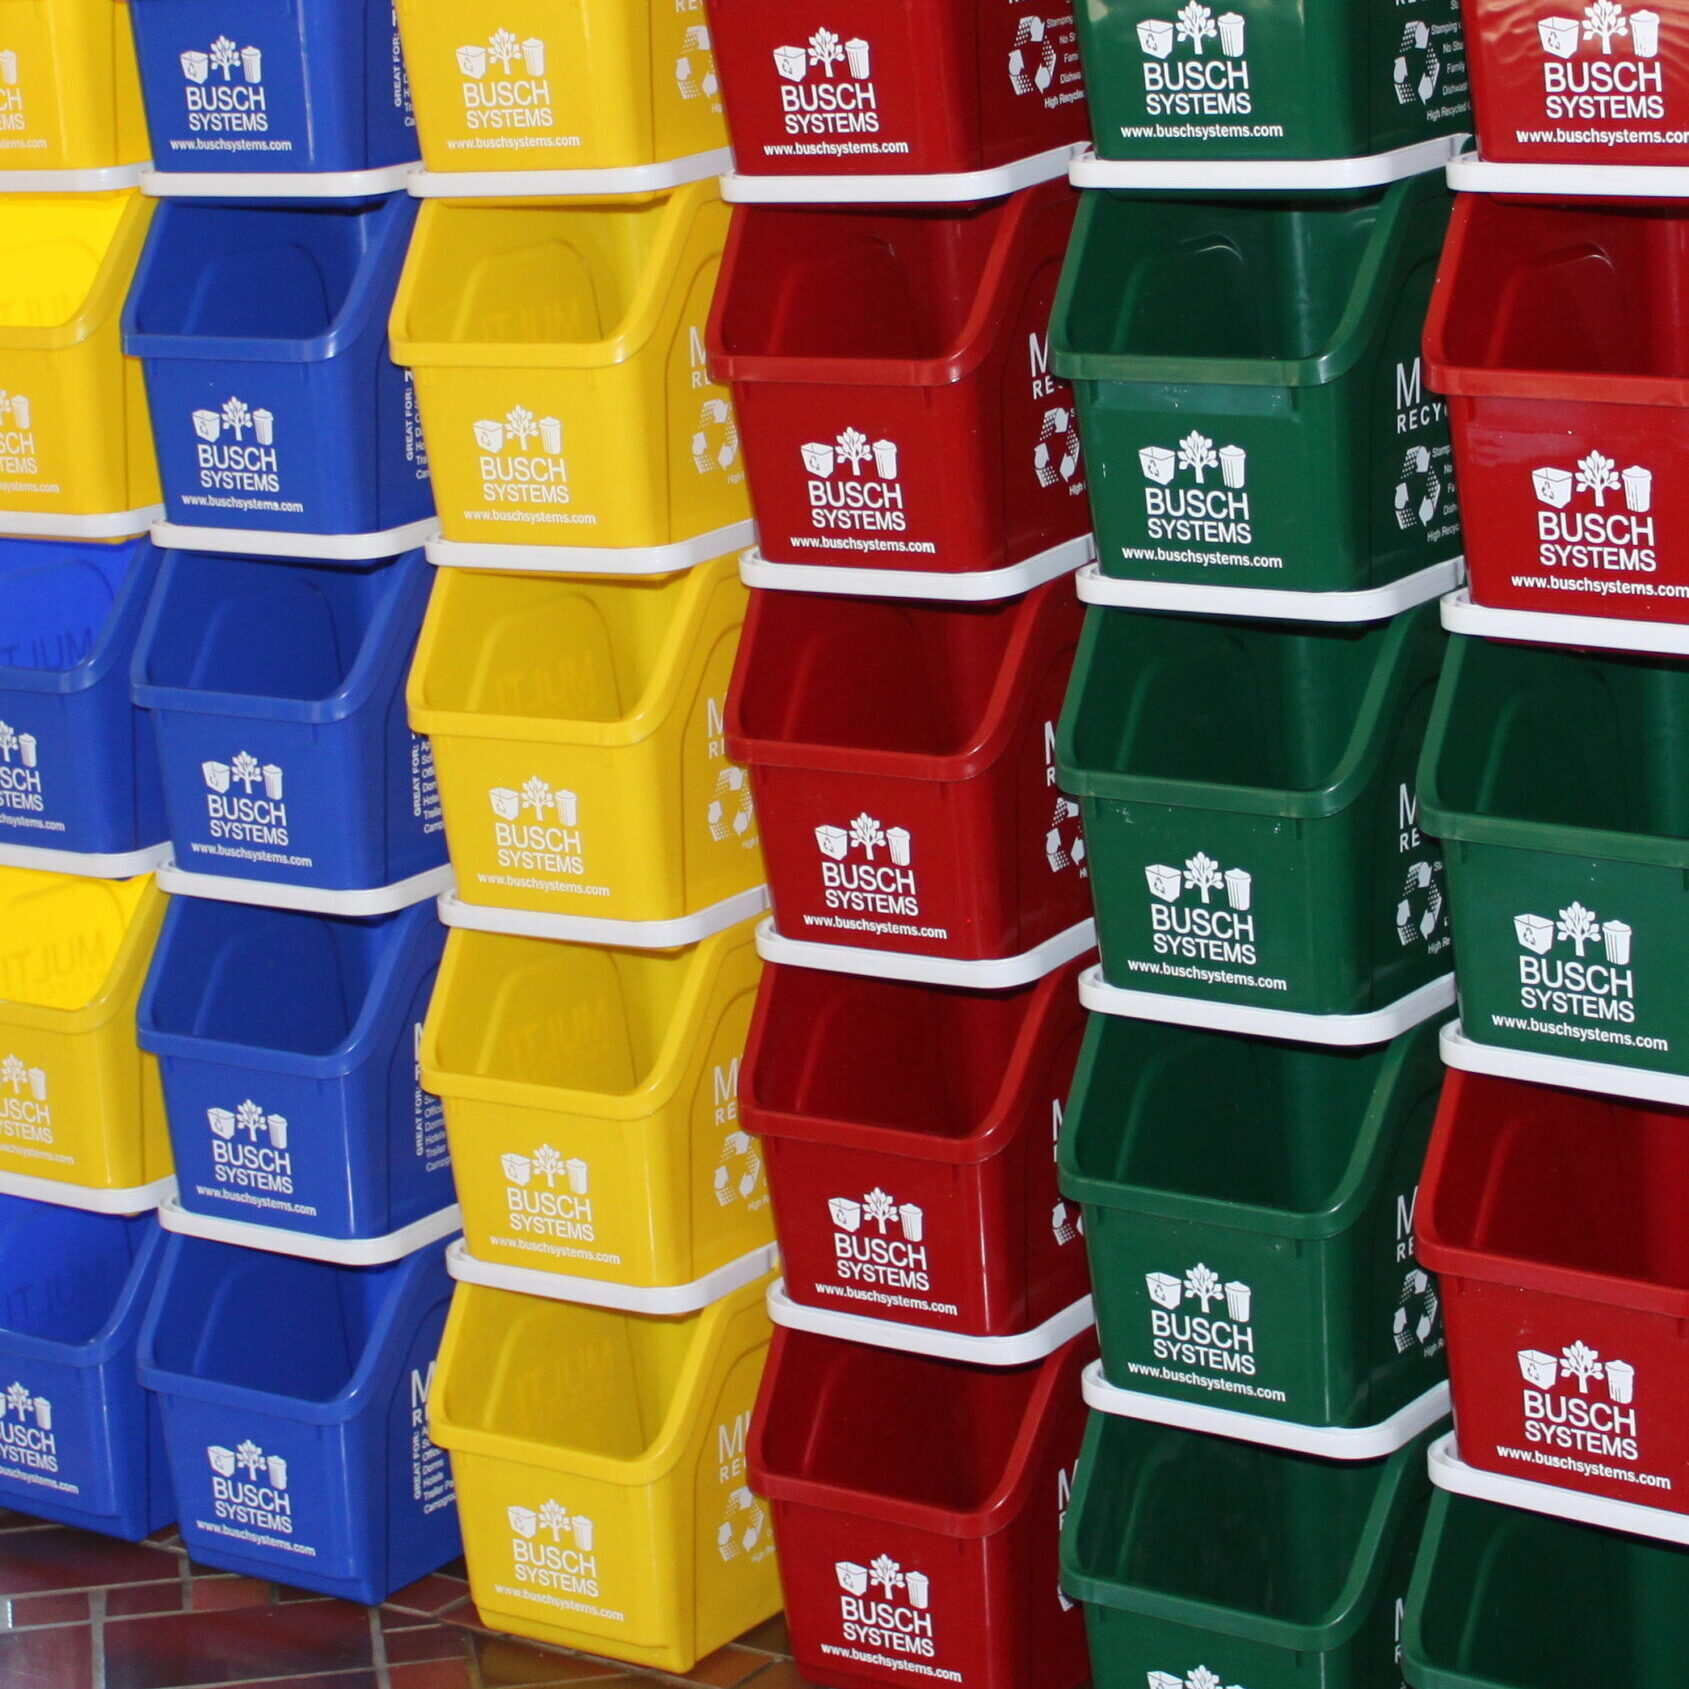 Busch Systems Multi-Recycler bins are conveniently stackable and come in a variety of colors - Red, Yellow, Green, & Blue. 